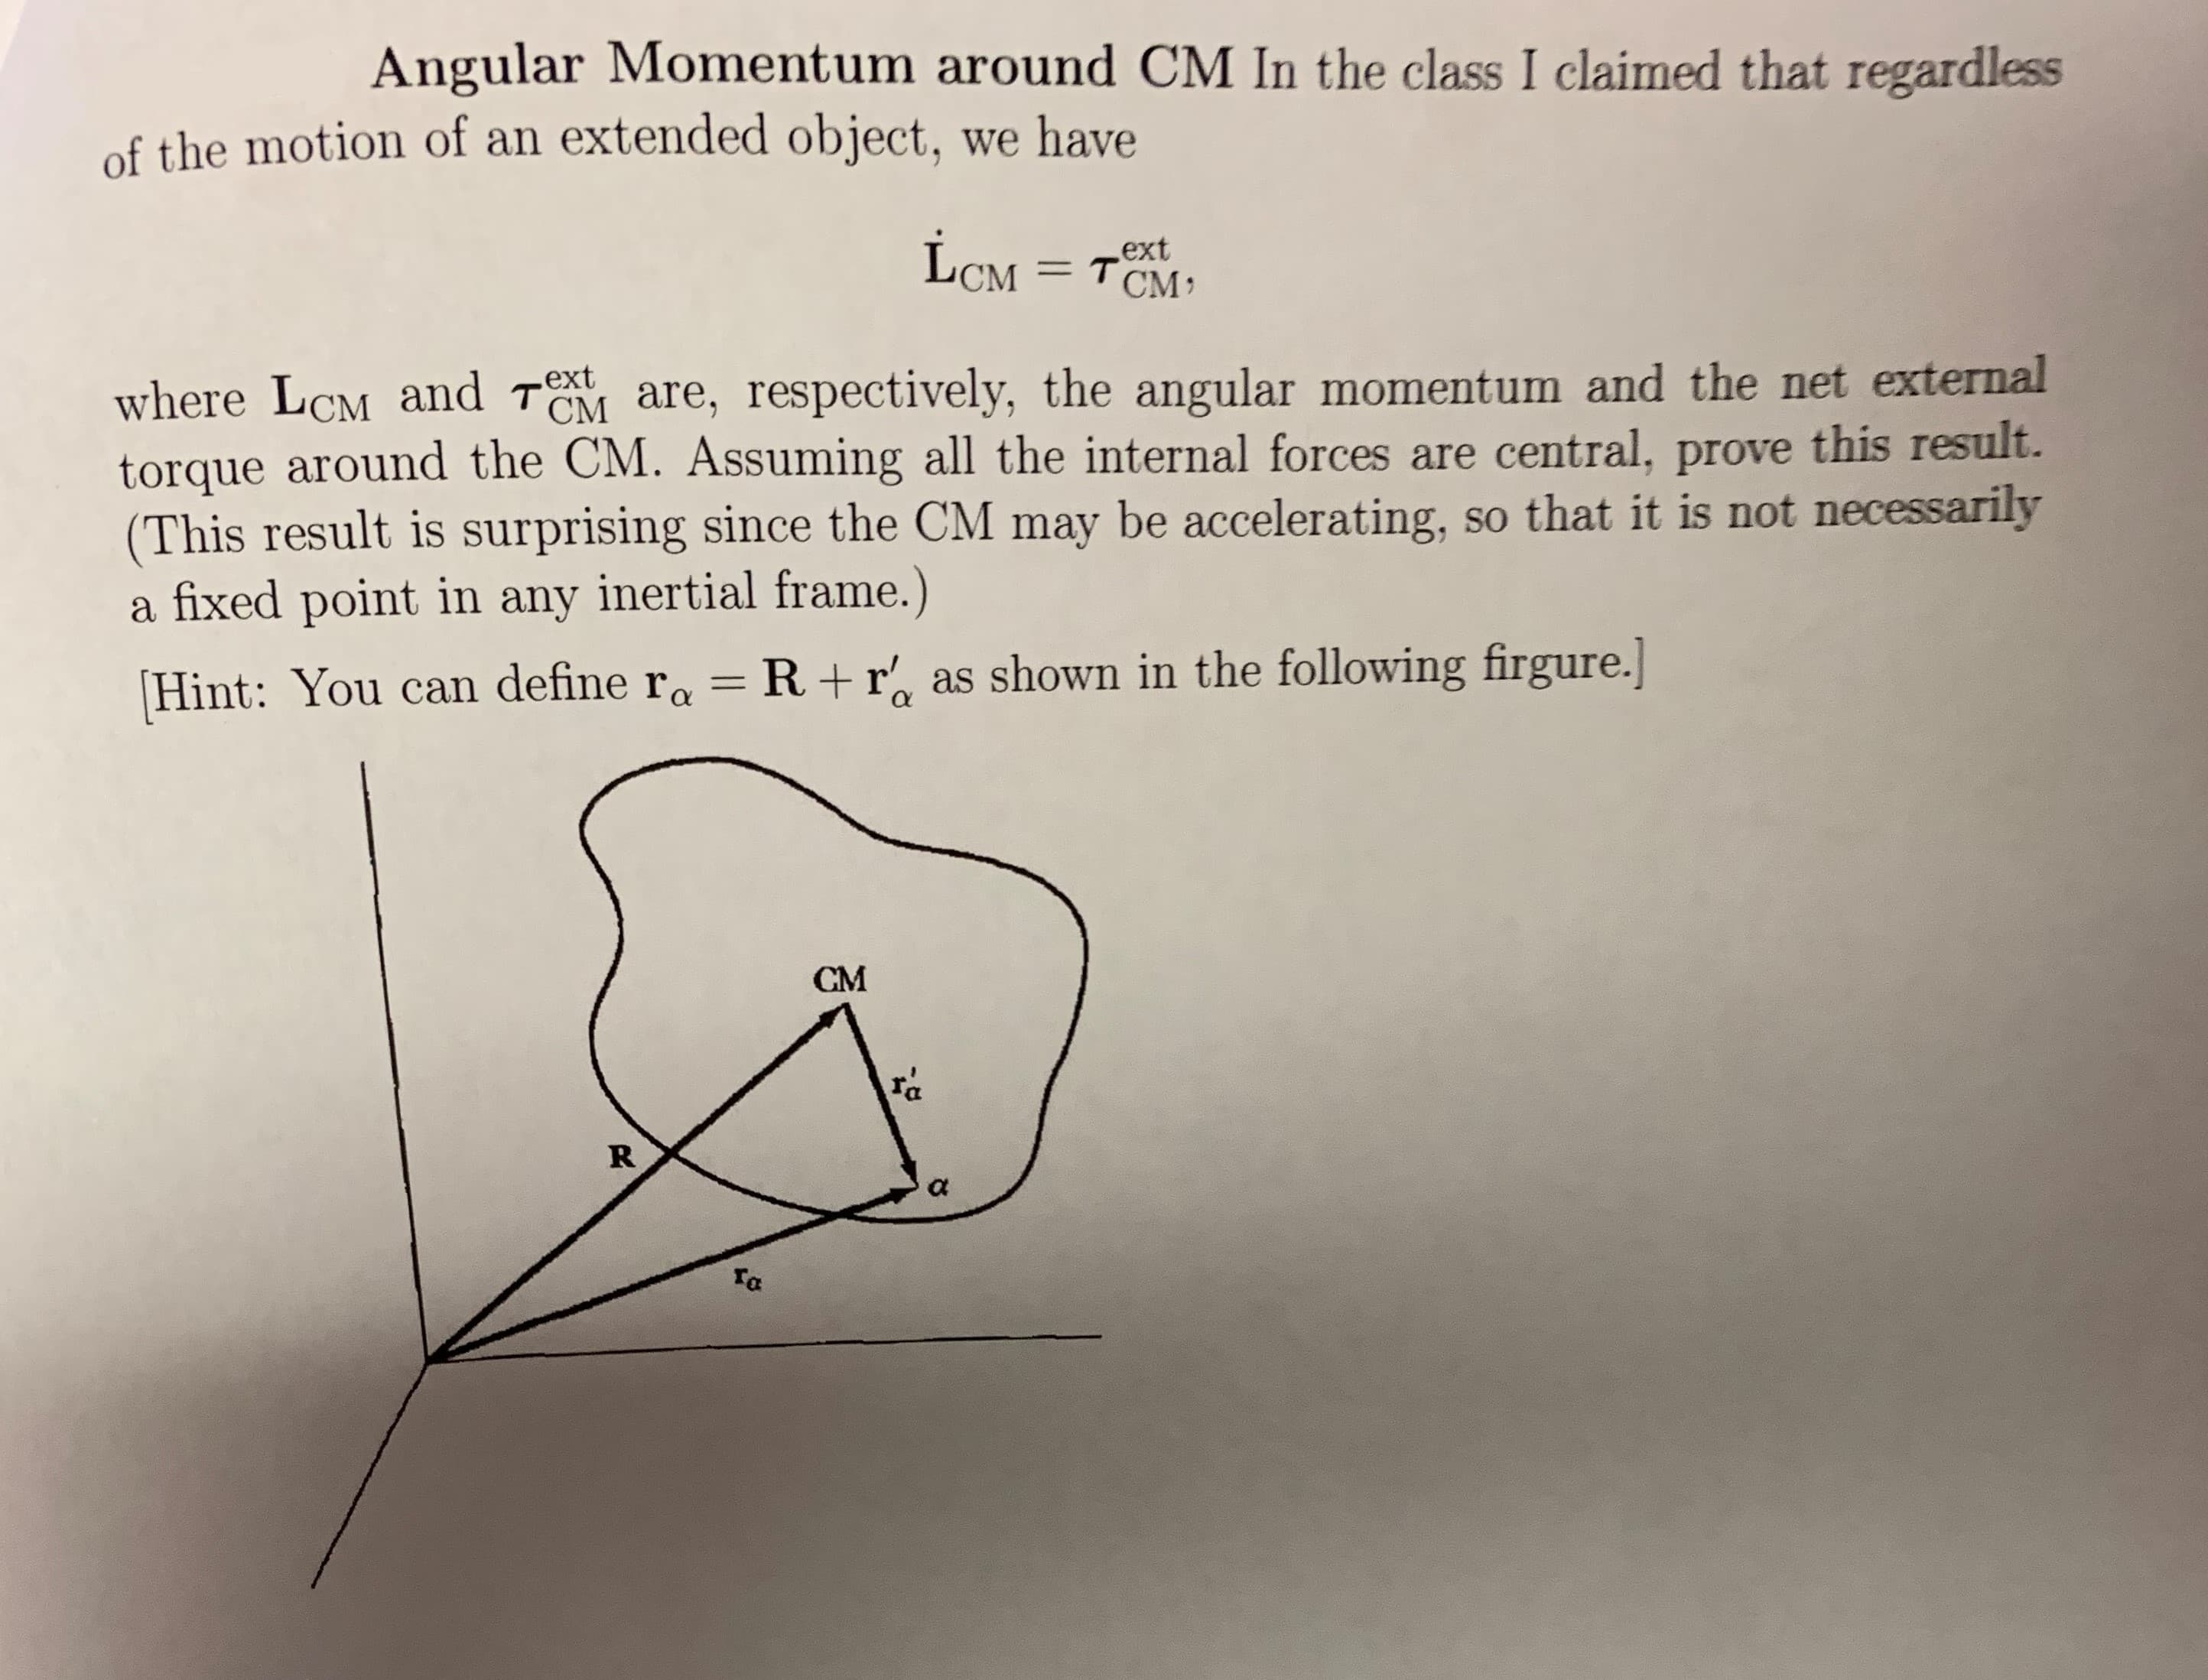 Angular Momentum around CM In the class I claimed that regardless
of the motion of an extended object, we have
ext
CM TCM
where LCM and TOM are, respectively, the angular momentum and the net external
torque around the CM. Assuming all the internal forces are central, prOve this result.
(This result is surprising since the CM may be accelerating, so
a fixed point in any inertial frame.)
.ext
that it is not necessarily
Hint: You can define ra R+ r as shown in the following firgure.
CM
ra
R
a
Ta
